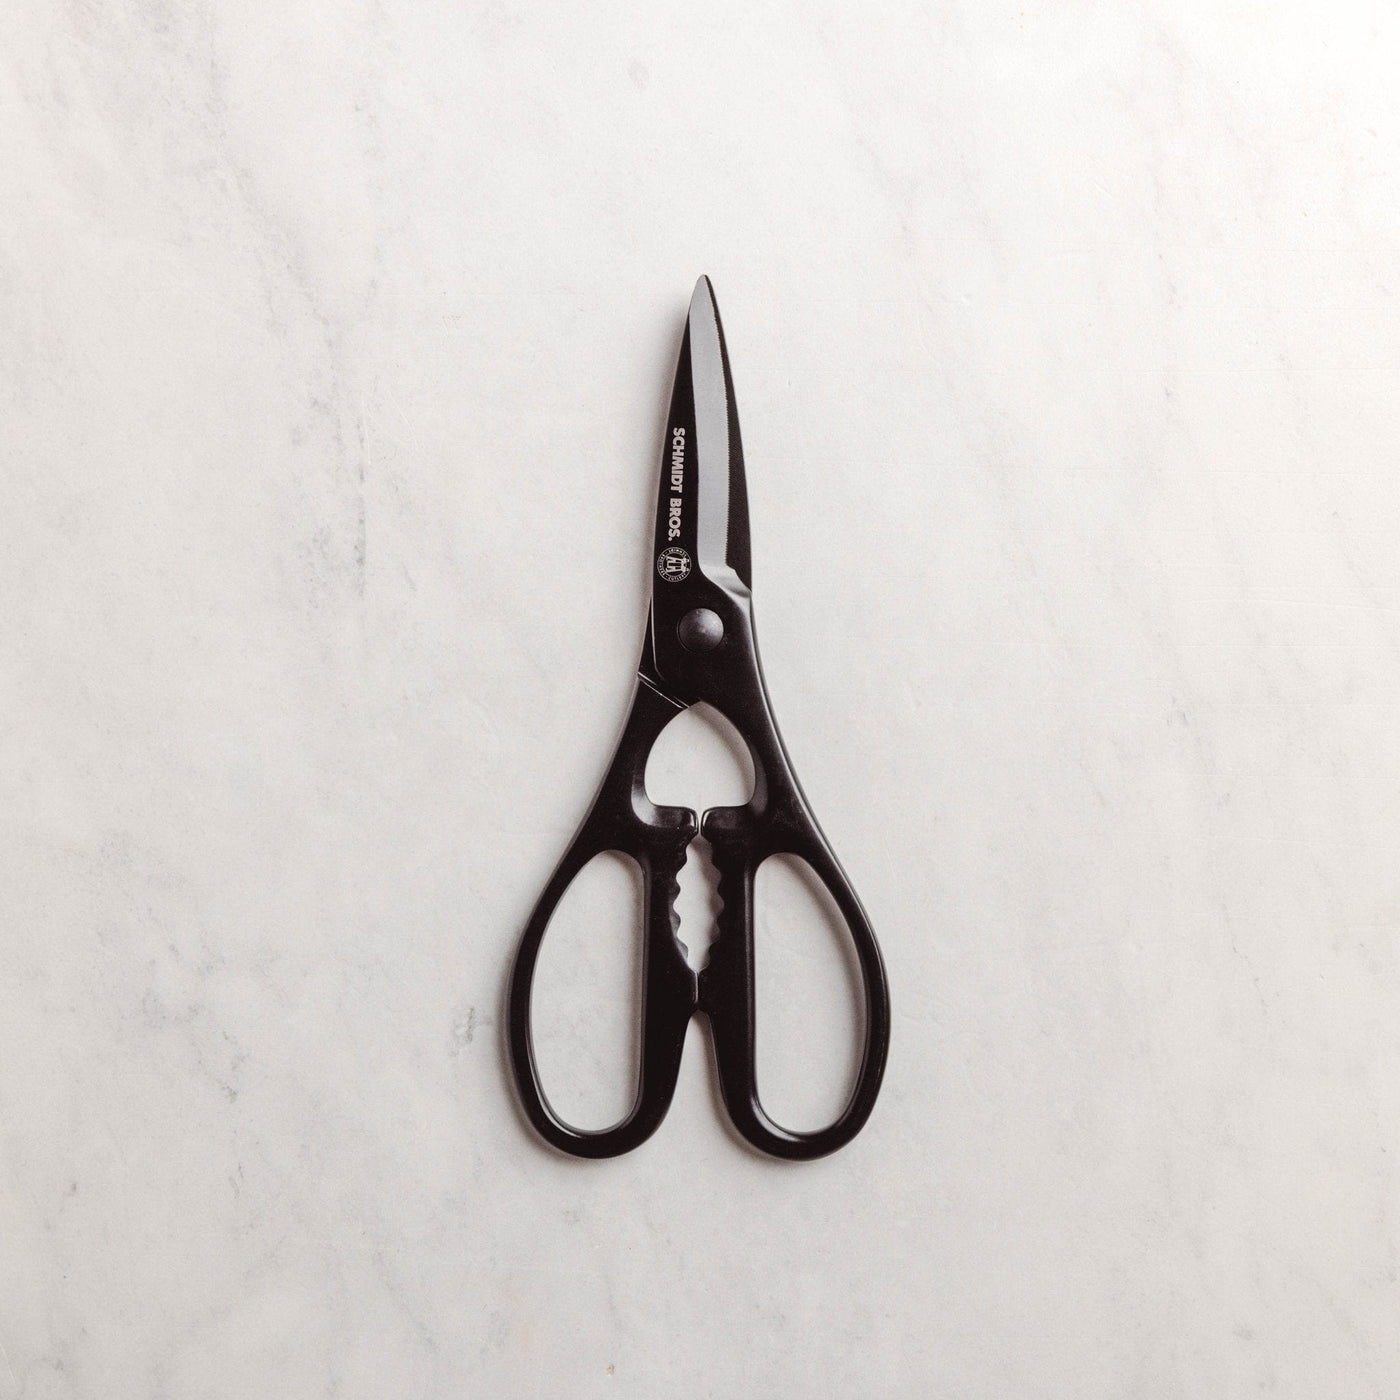 Poultry scissors carving forged stainless Steel made in Germany